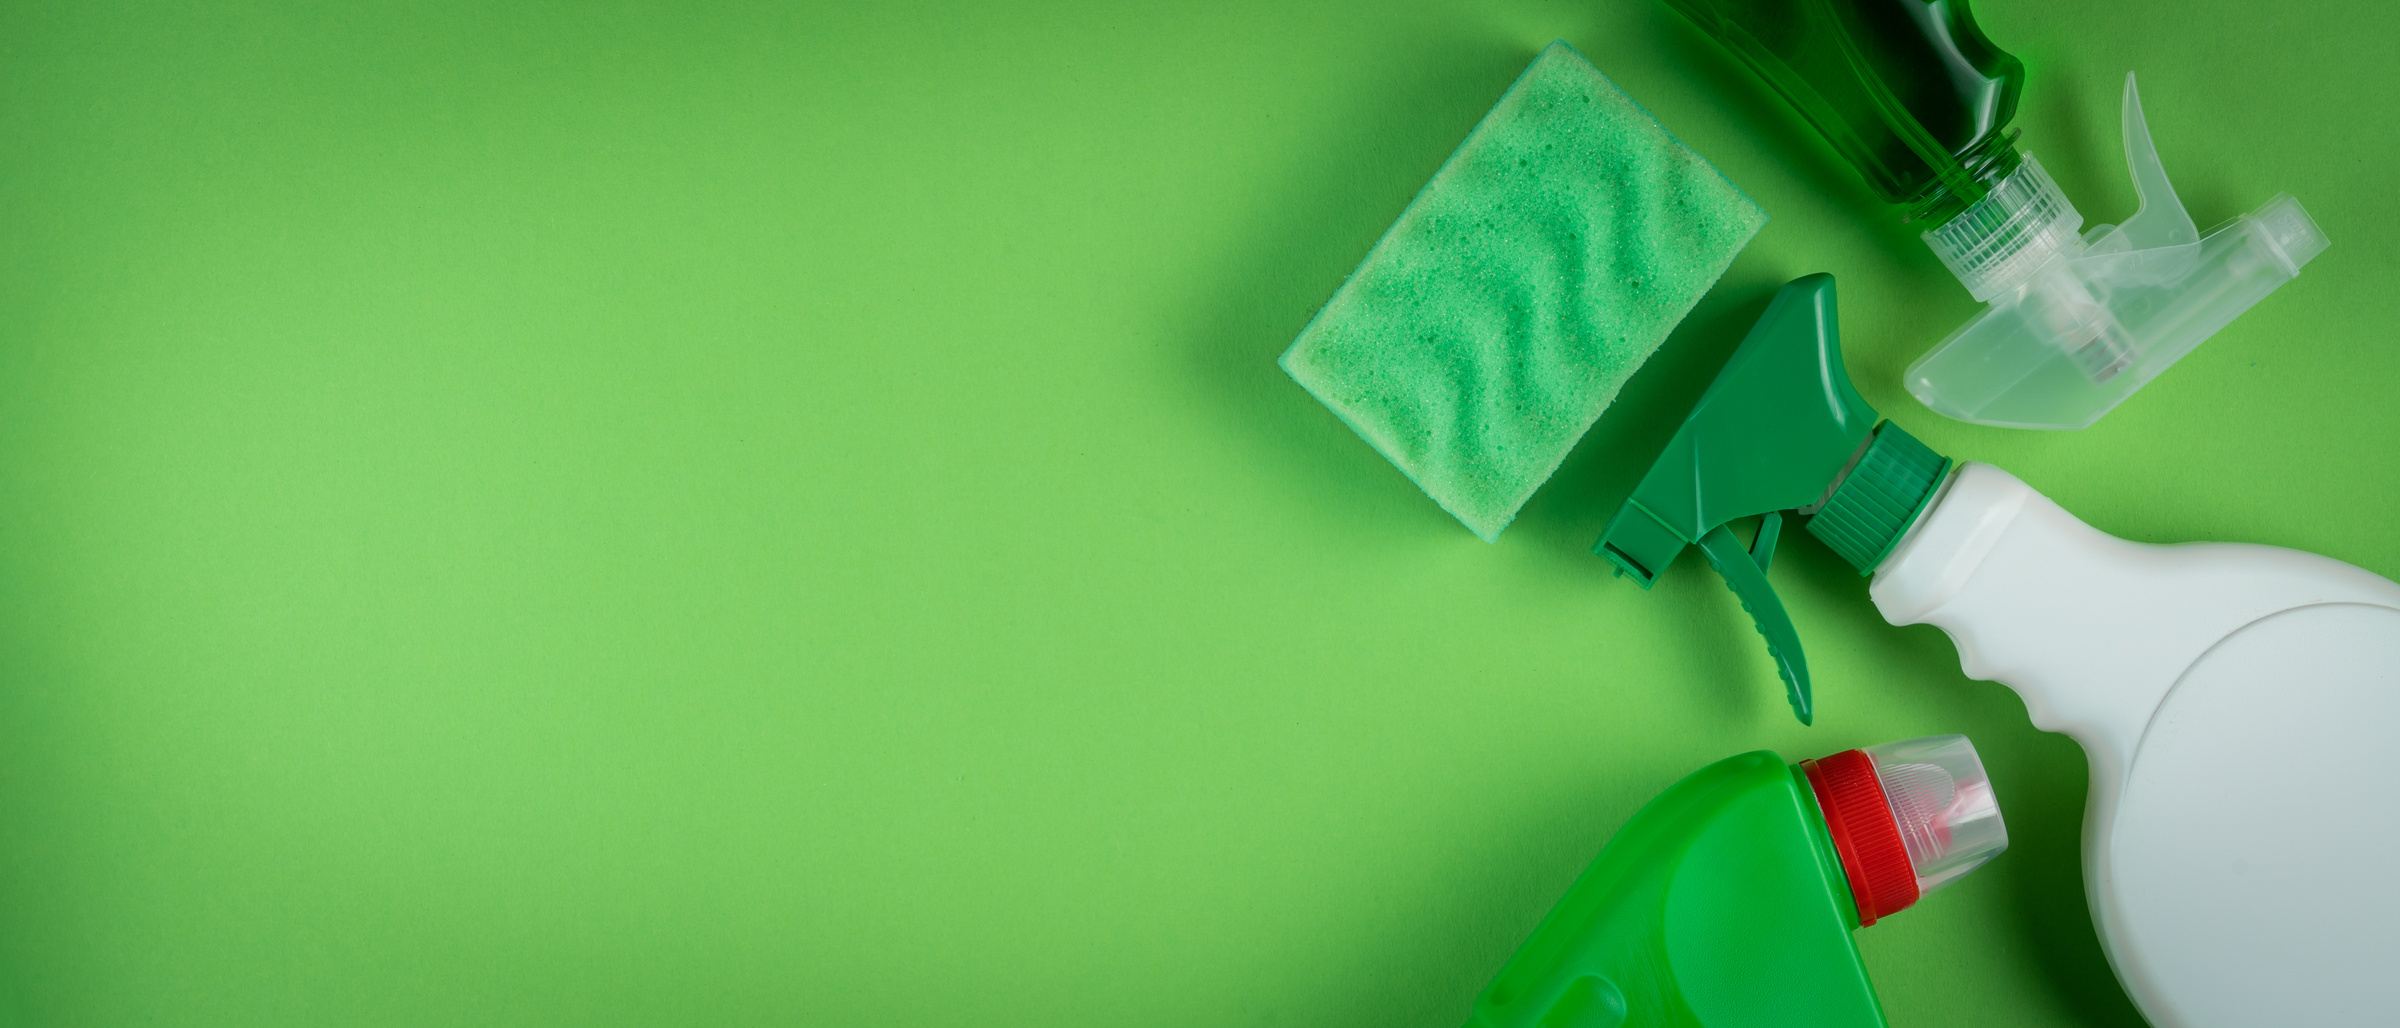 Cleaning supplies on green background